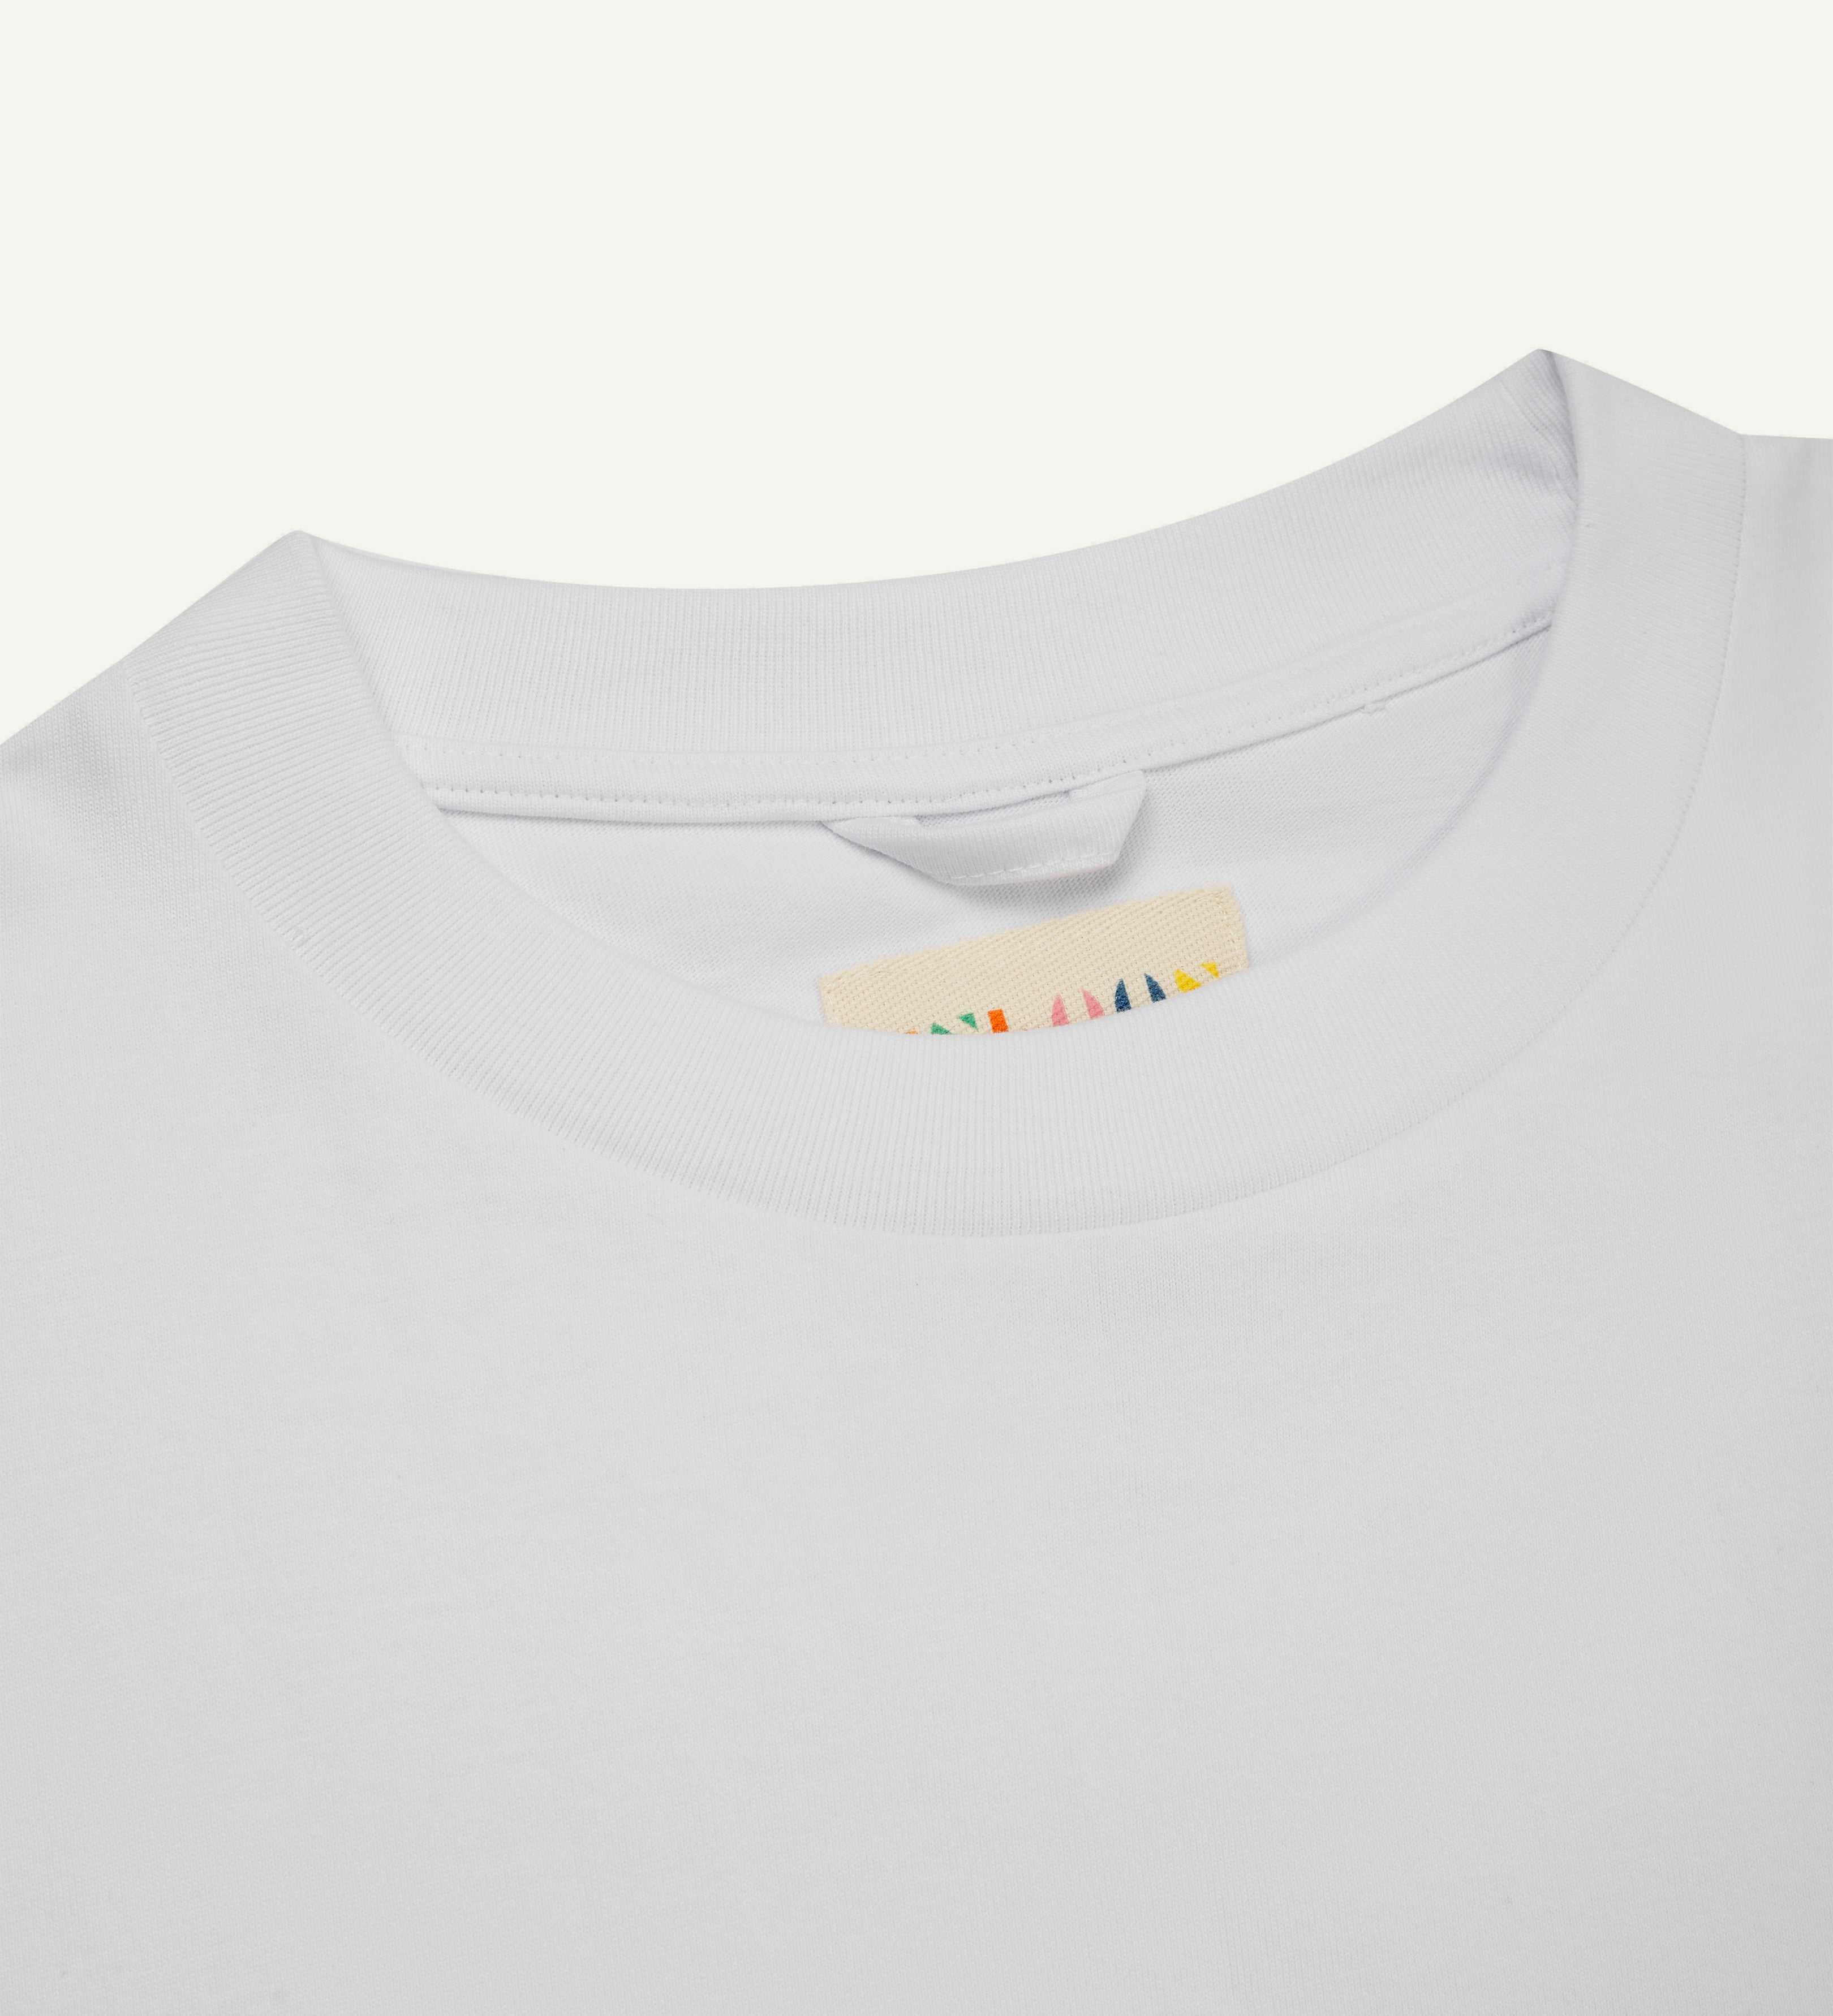 Close-up view of neck - men's white oversized organic cotton T-shirt by Uskees